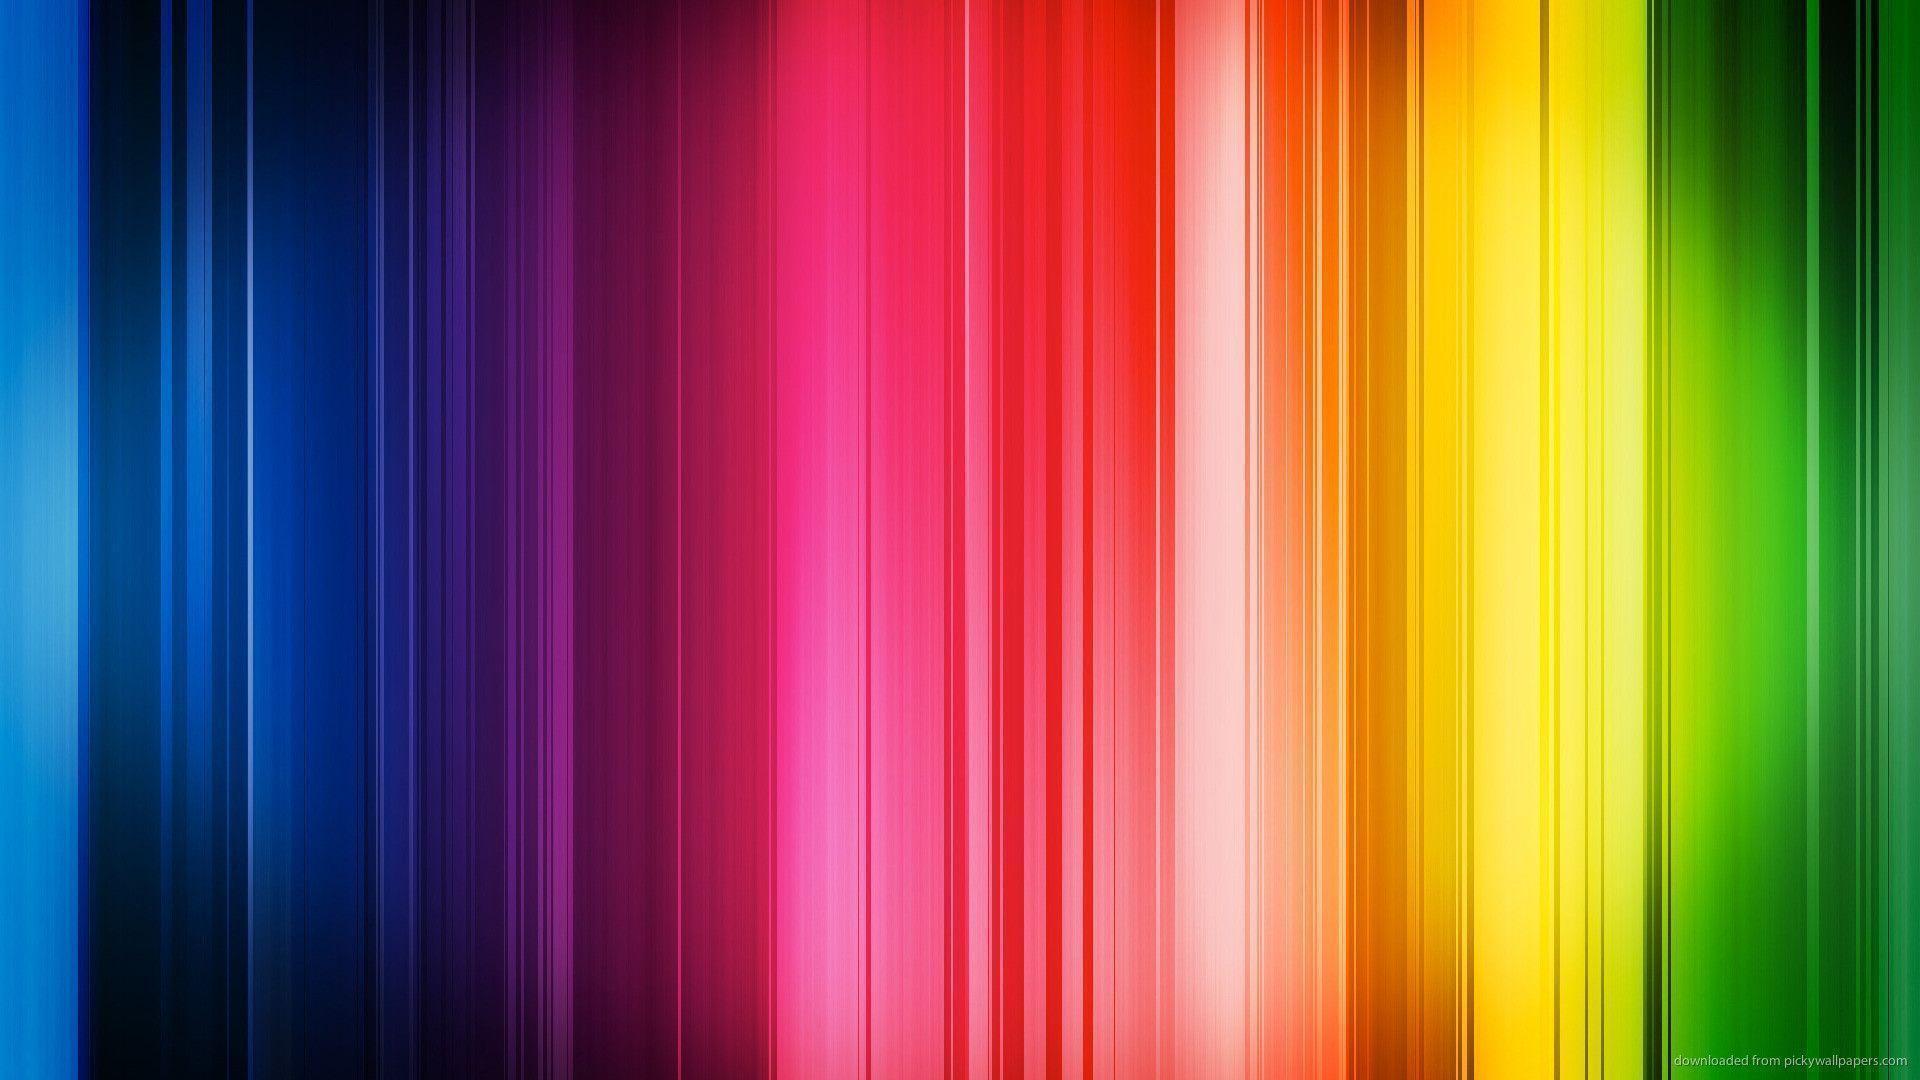 Colorful Background 11 305342 Image HD Wallpaper. Wallfoy.com